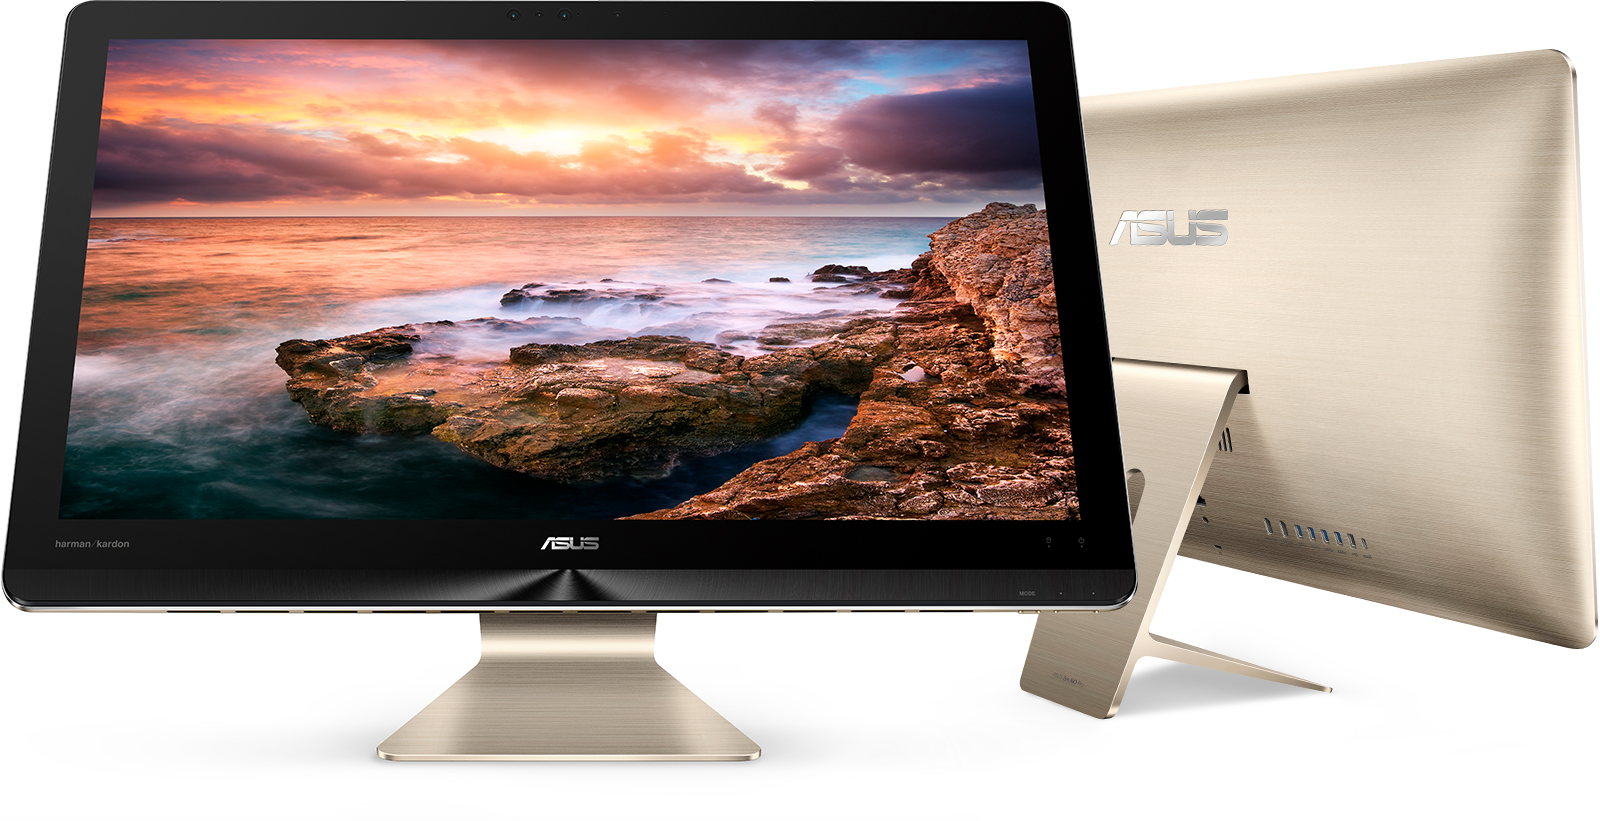 Zen AiO Pro 24 Z240｜All-in-One PCs｜ASUS USA